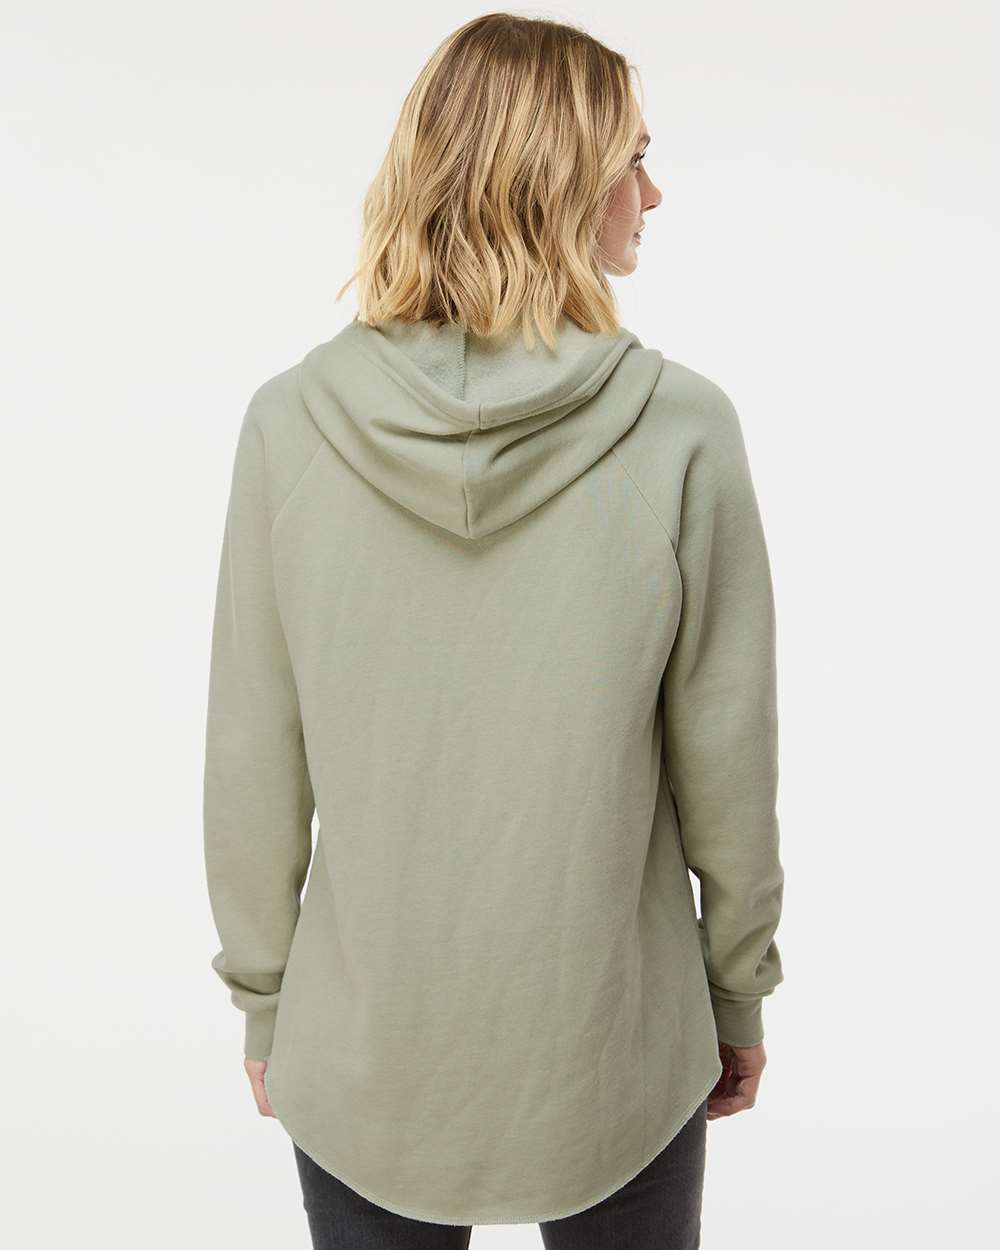 Independent Trading Co. Women’s Lightweight California Wave Wash Hooded Sweatshirt PRM2500 #colormdl_Sage